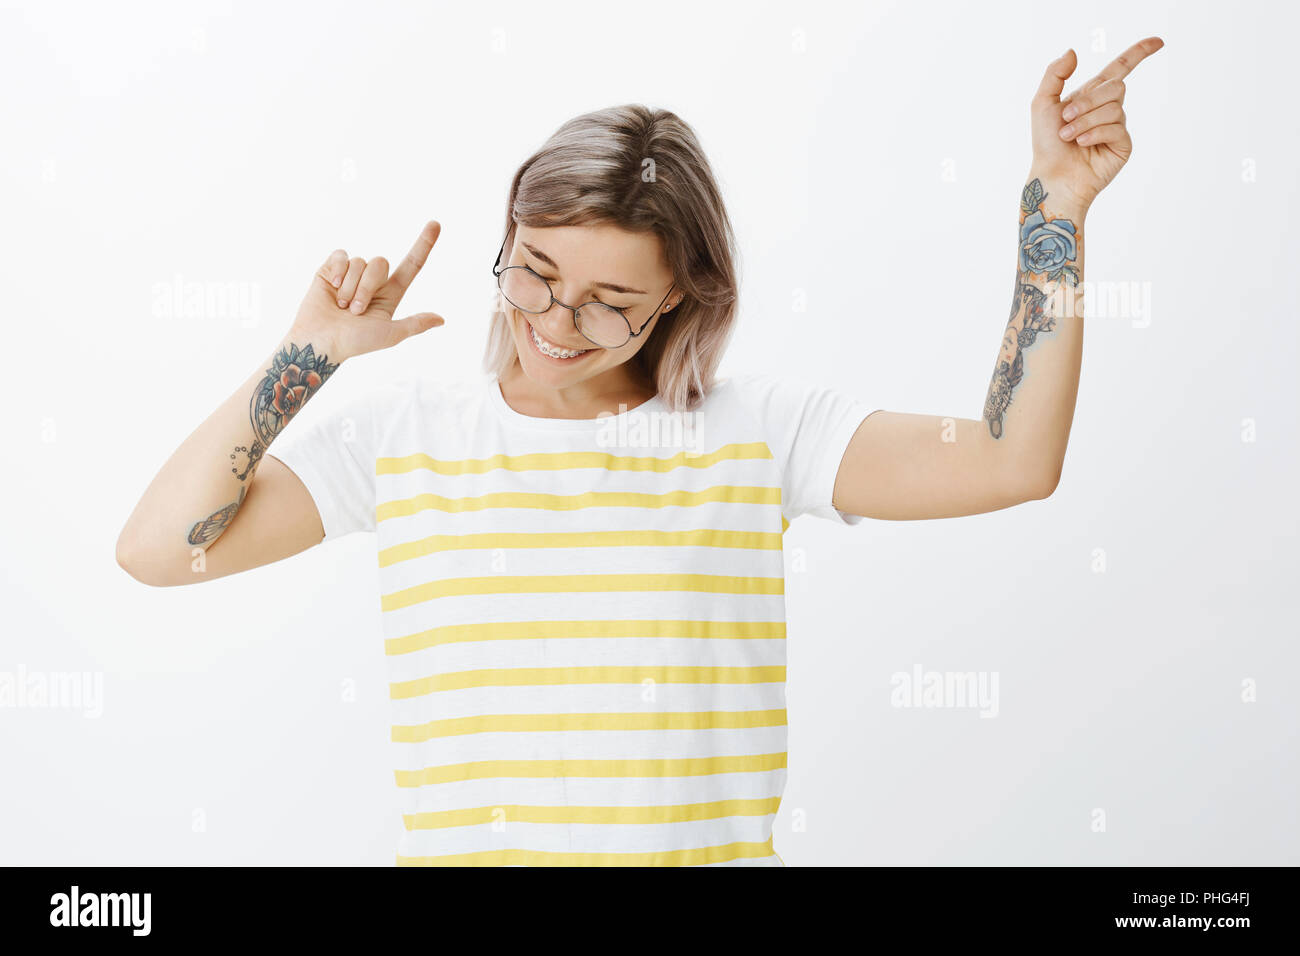 Dance and enjoy life. Portrait of positive happy young girlfriend in striped tellow t-shirt, waving and gesturing with tattooed arms, smiling joyfully while gazing downwards, being in great mood Stock Photo